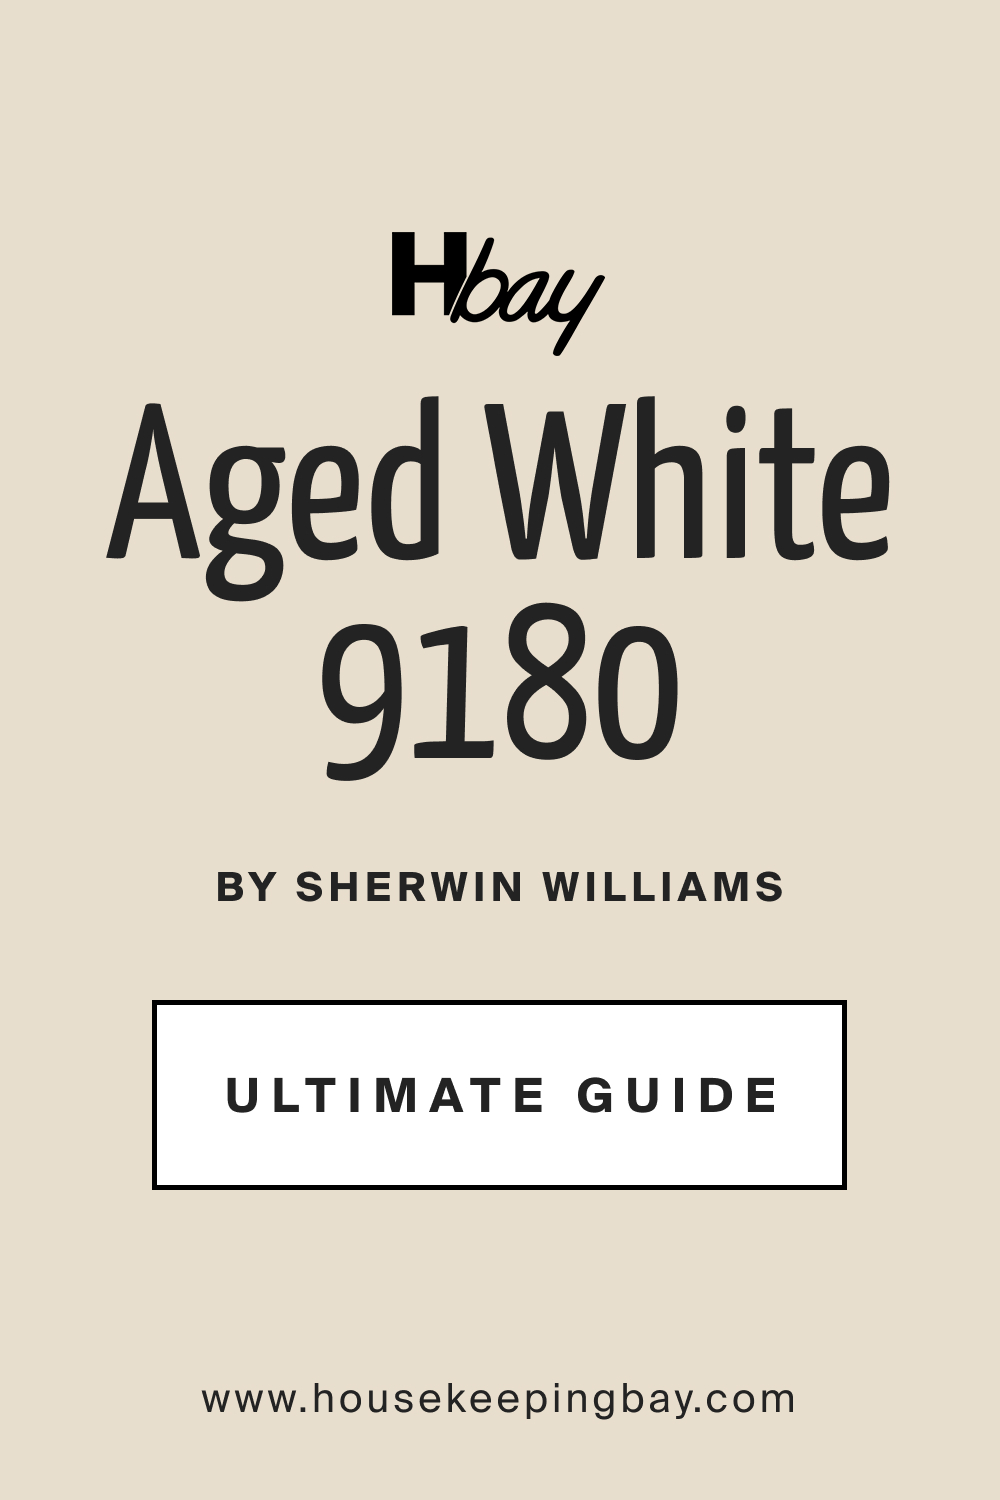 SW 9180 Aged White by Sherwin Williams Ultimate Guide